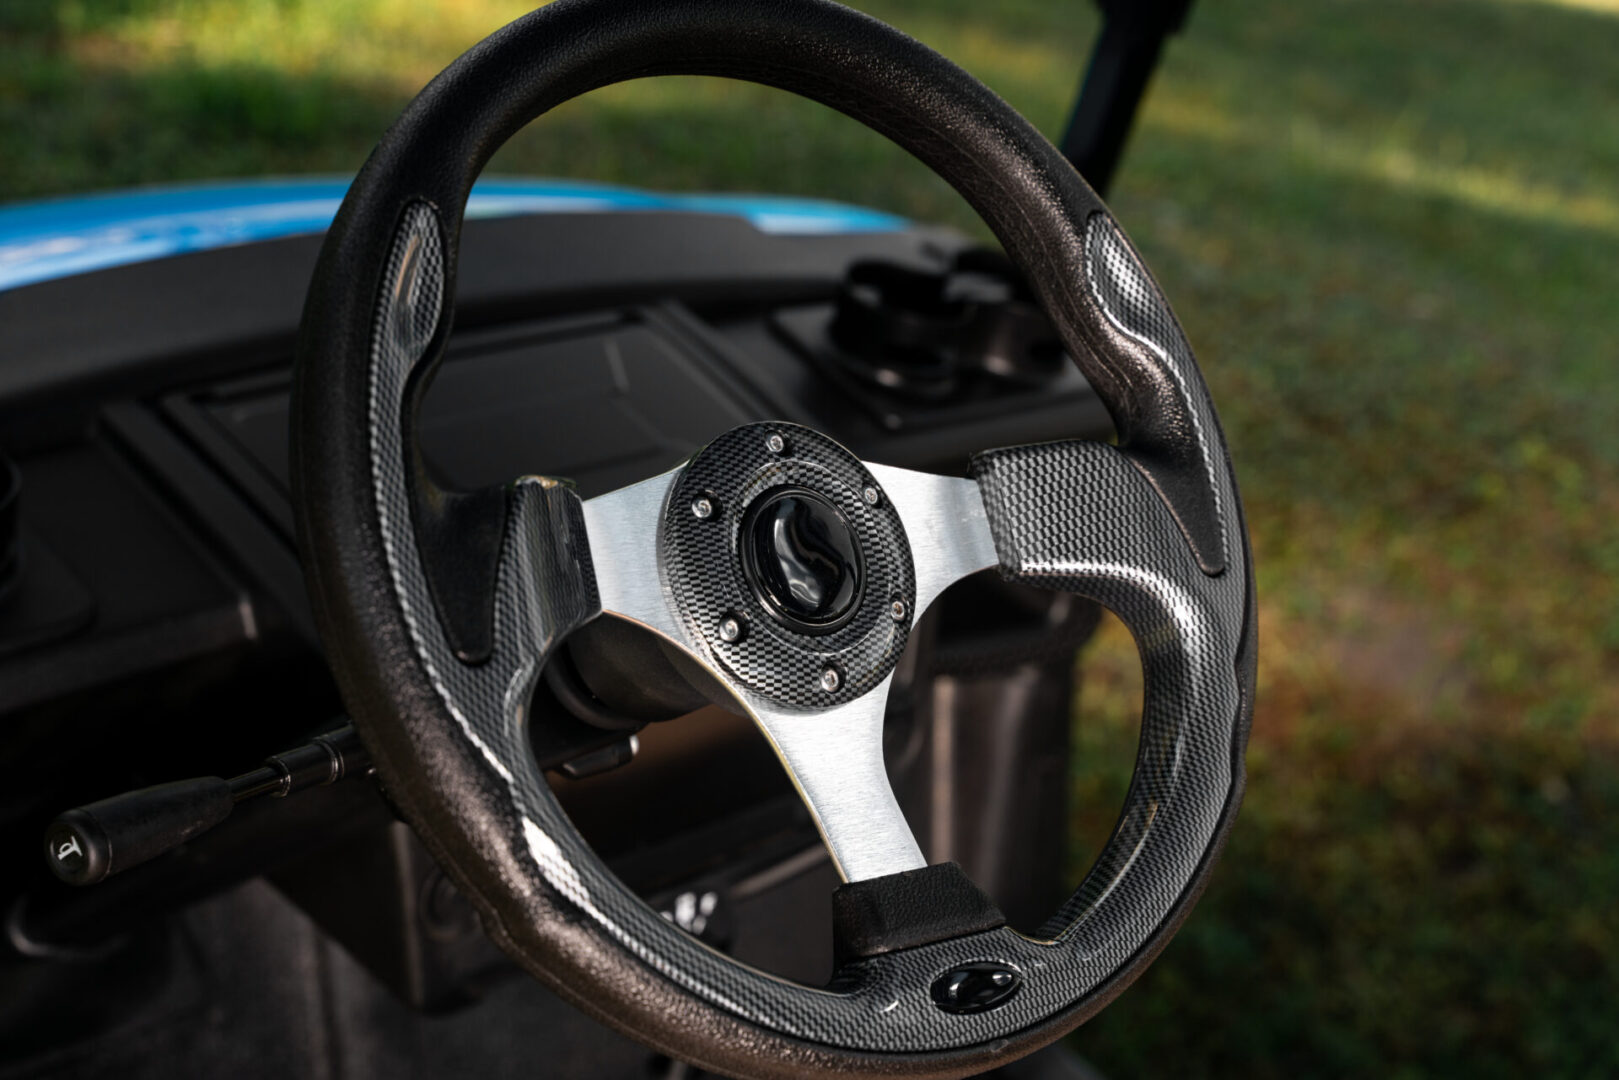 A close up of the steering wheel on a golf cart